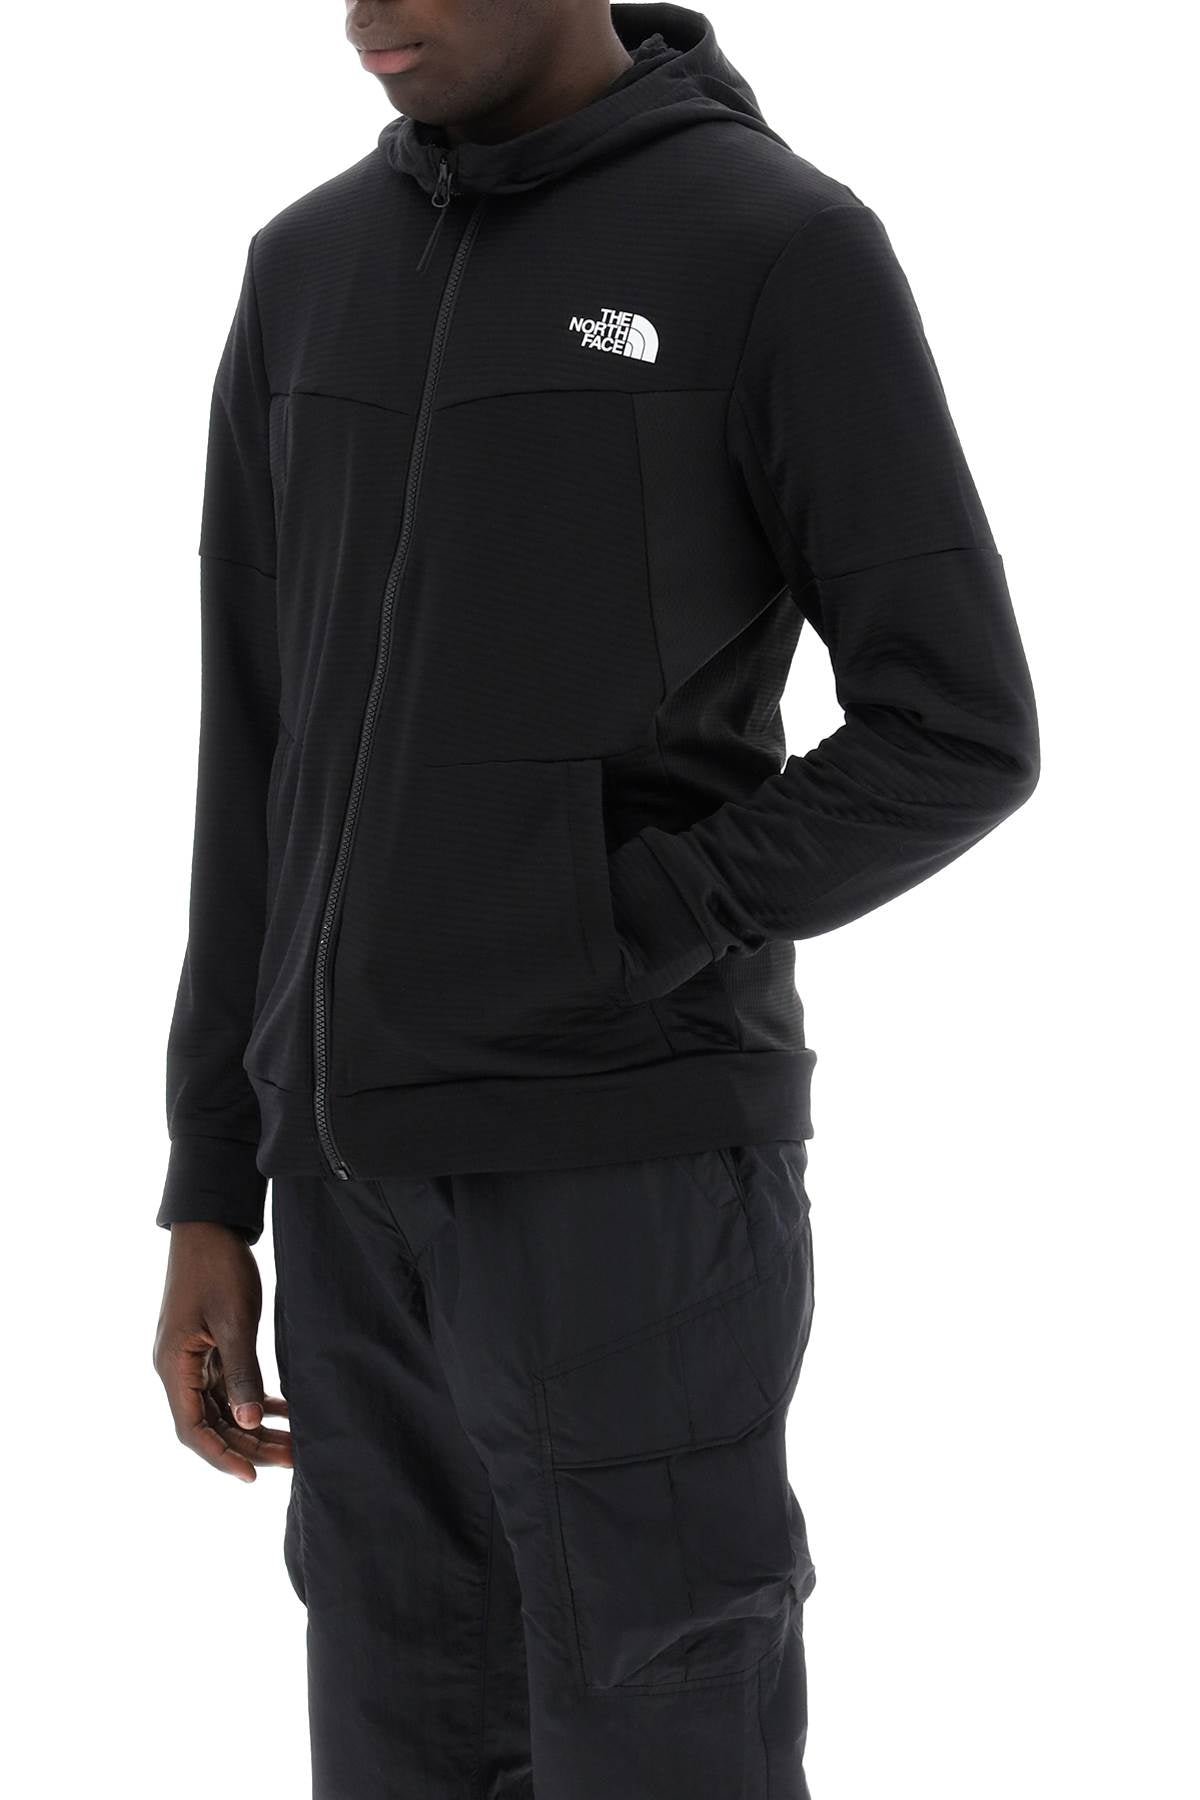 The north face hooded fleece sweatshirt with-3